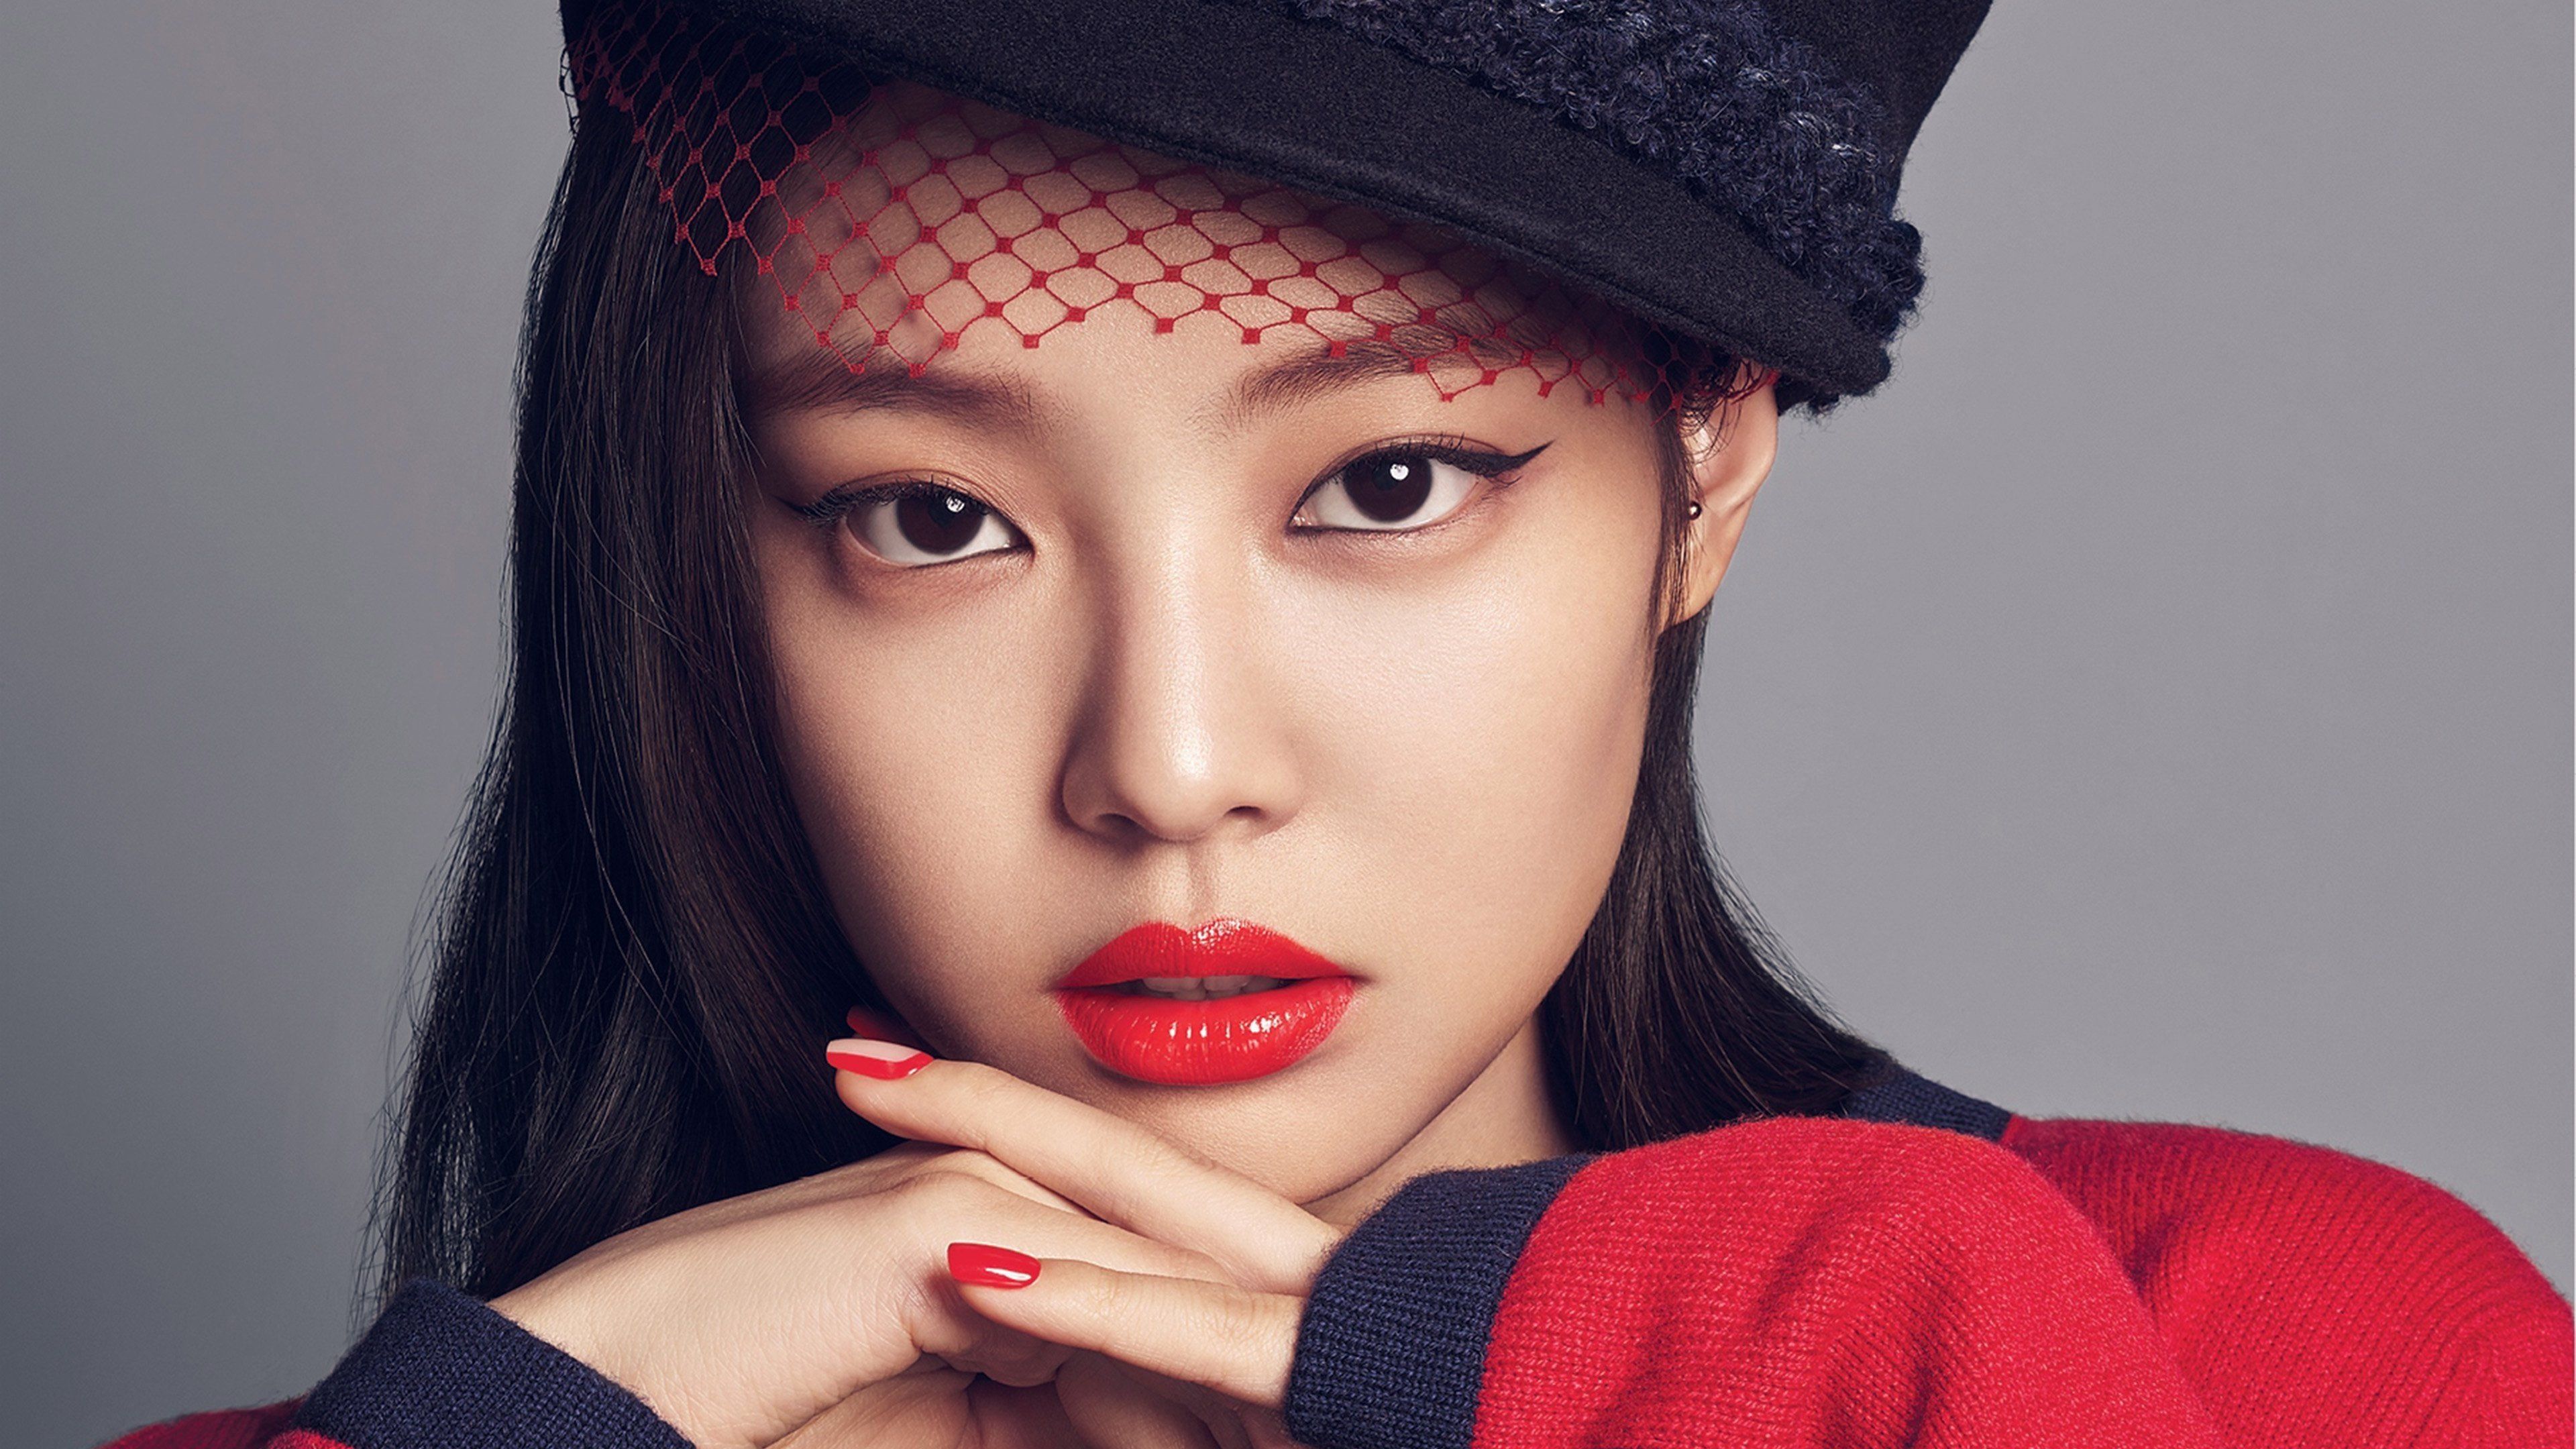 Jennie from Blackpink sets record with 300 million YouTube views